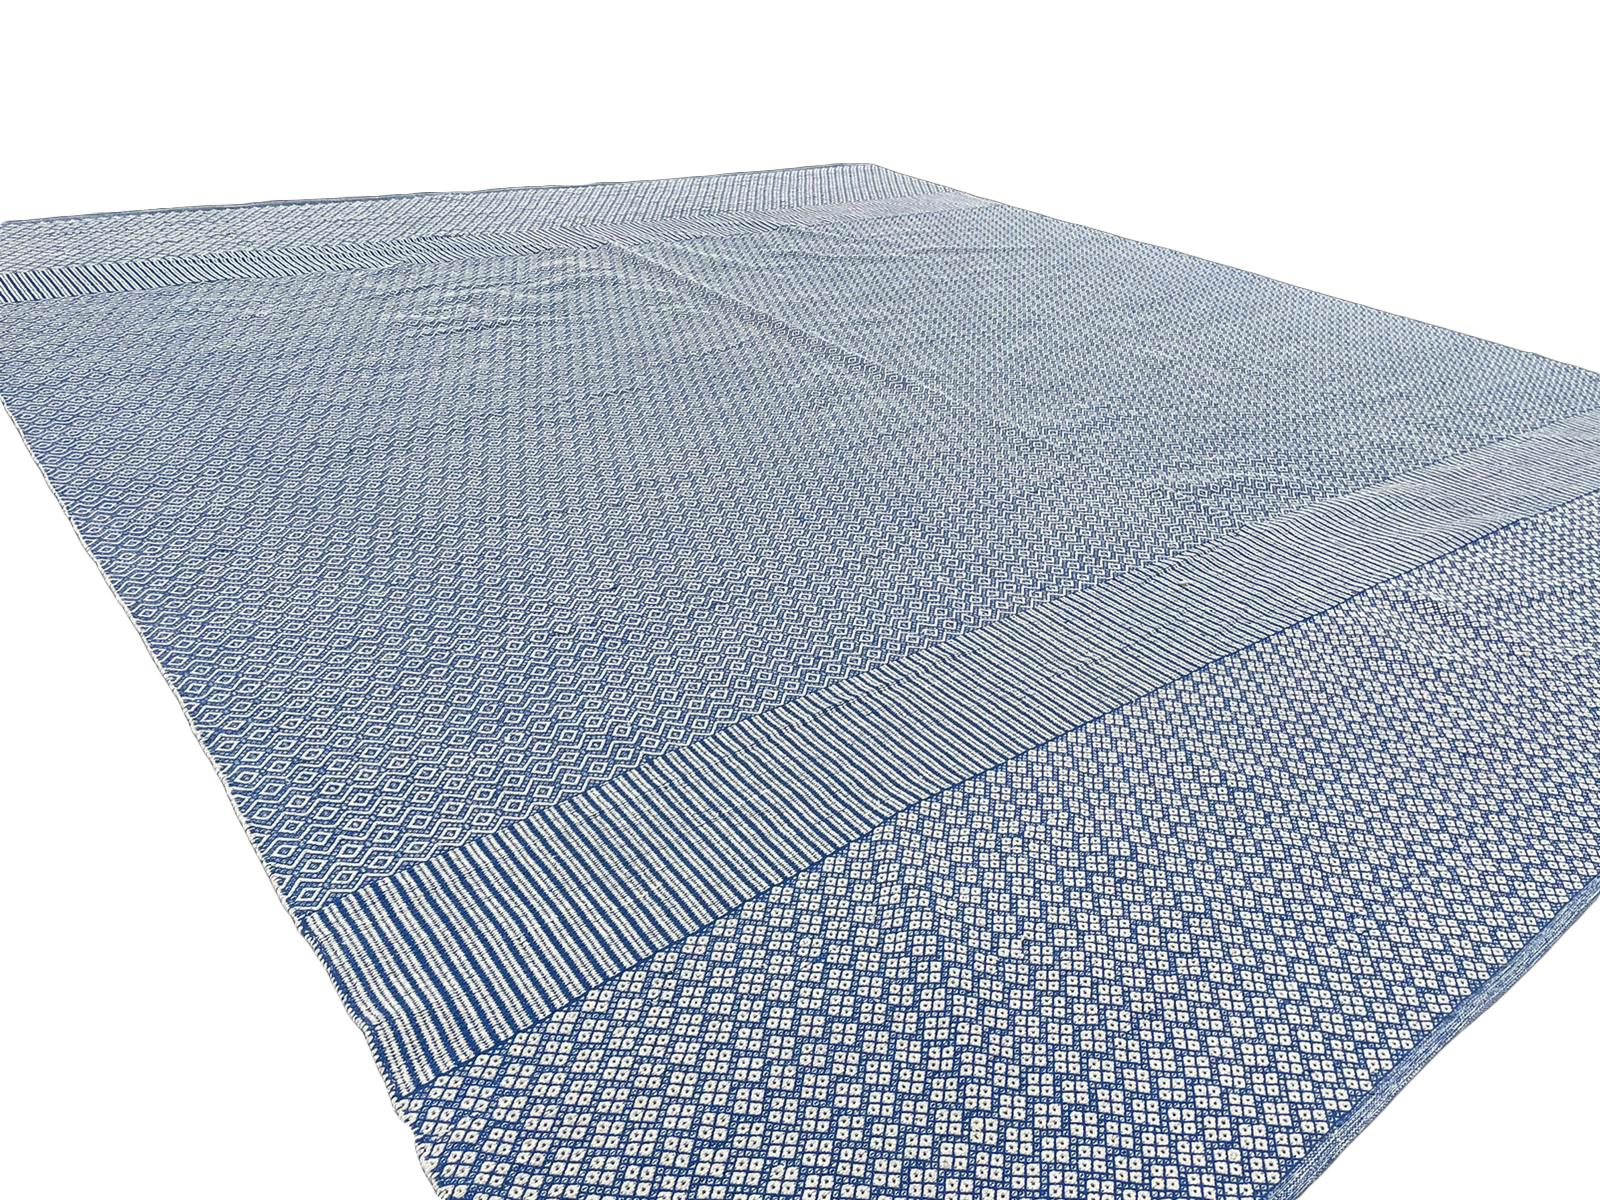 Oversized Blue and White Flat-Weave Indian Kilim by Gordian Rugs 4